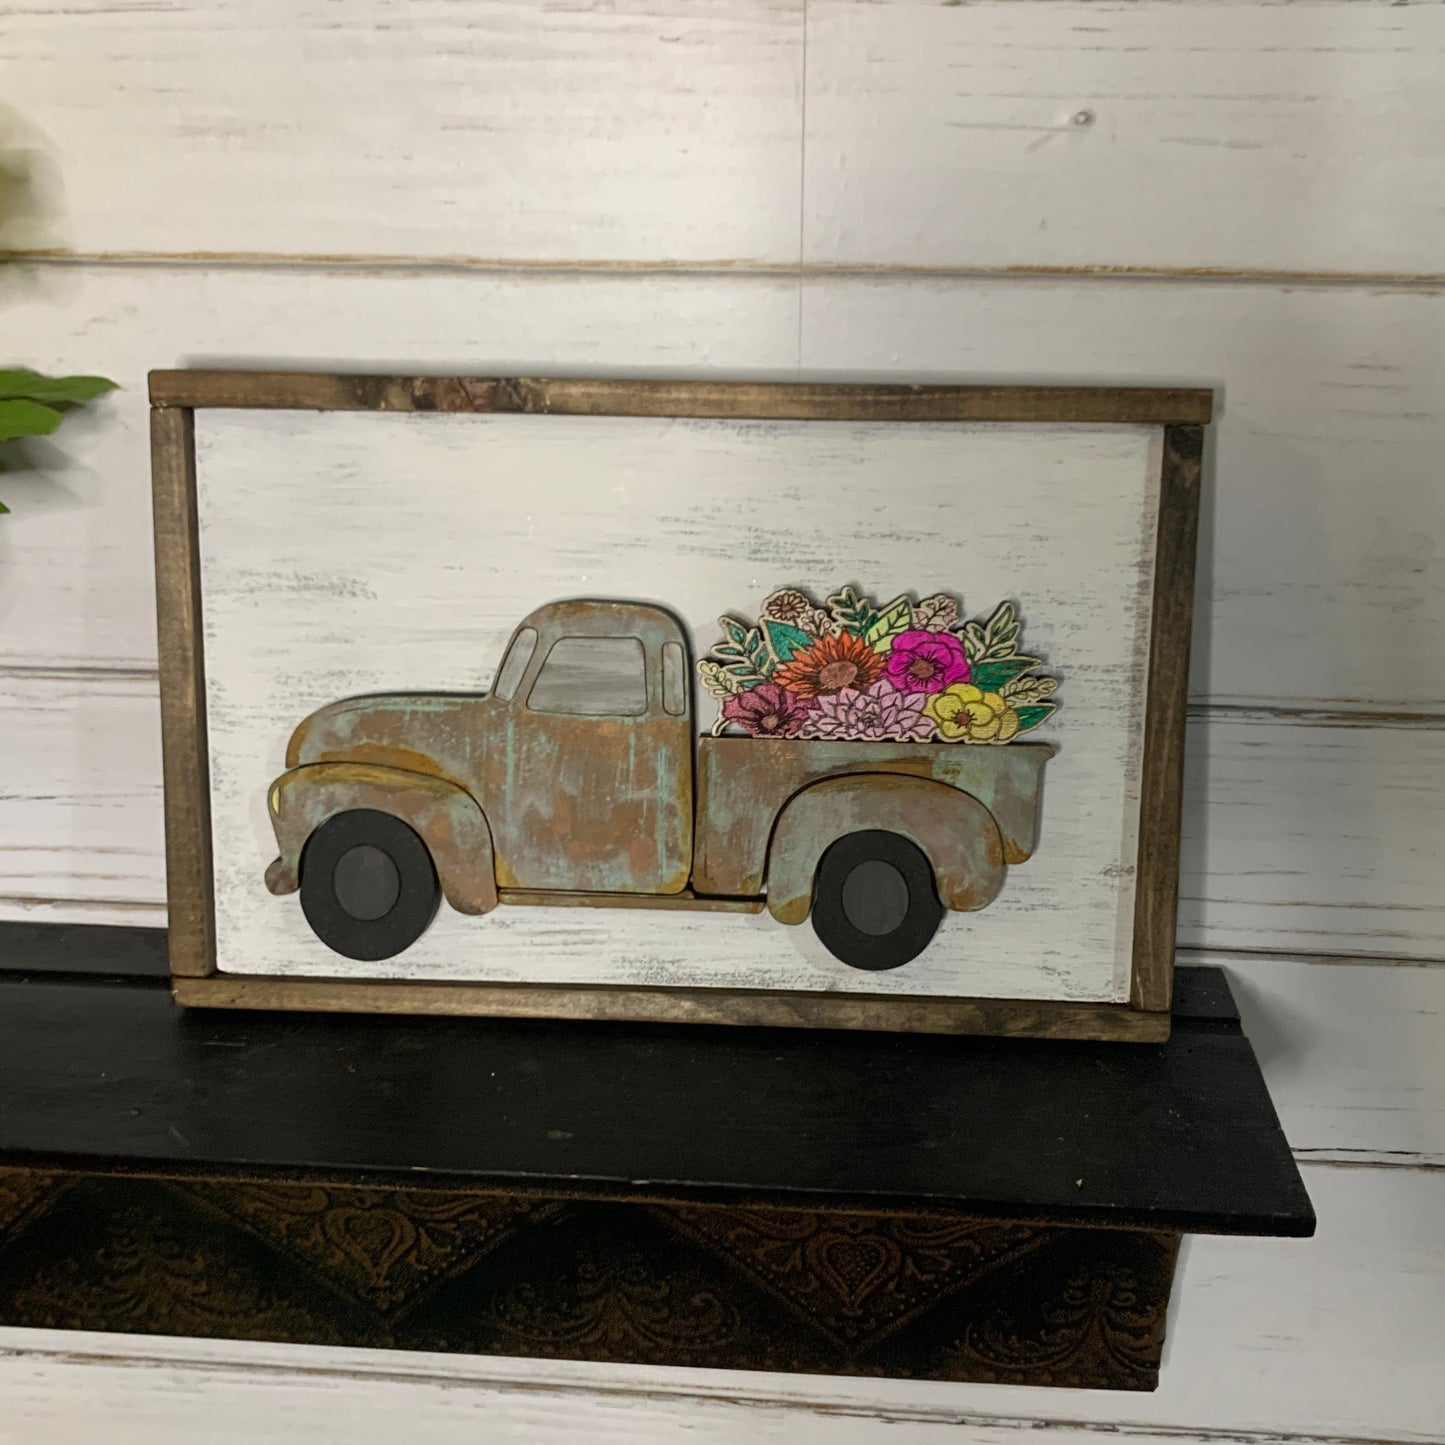 Vintage Truck - with Christmas Tree, Pumpkins, Snowman, Flag, and Flowers